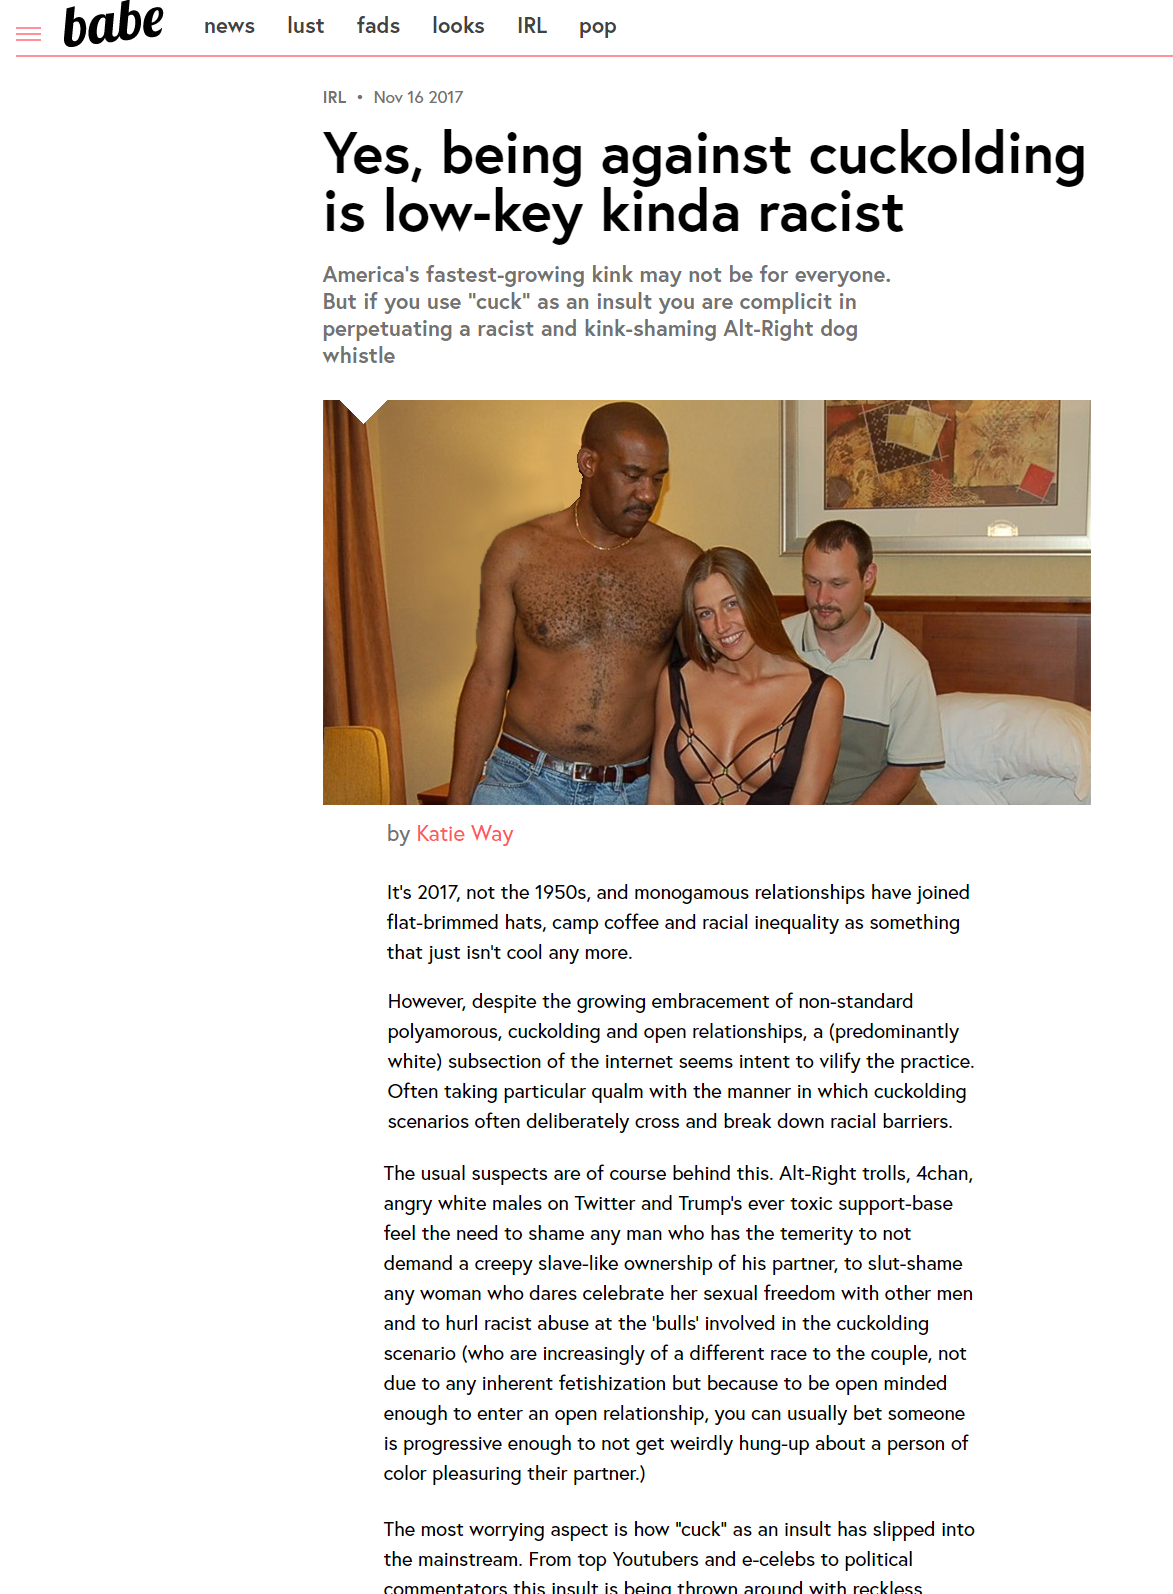 Racist husband cried after finding